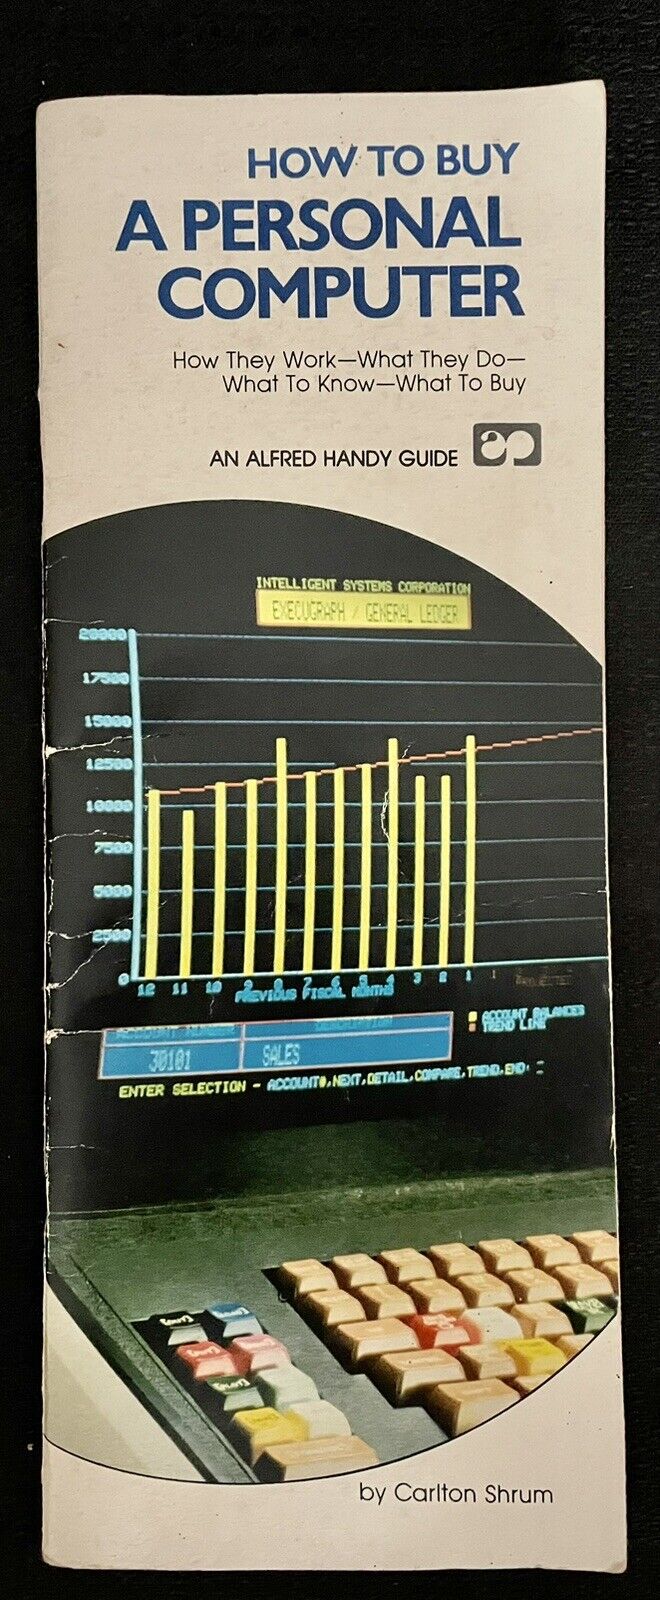 Vintage Computer Brochure. “HOW TO BUY A PERSONAL COMPUTER” by Carlton Shrum